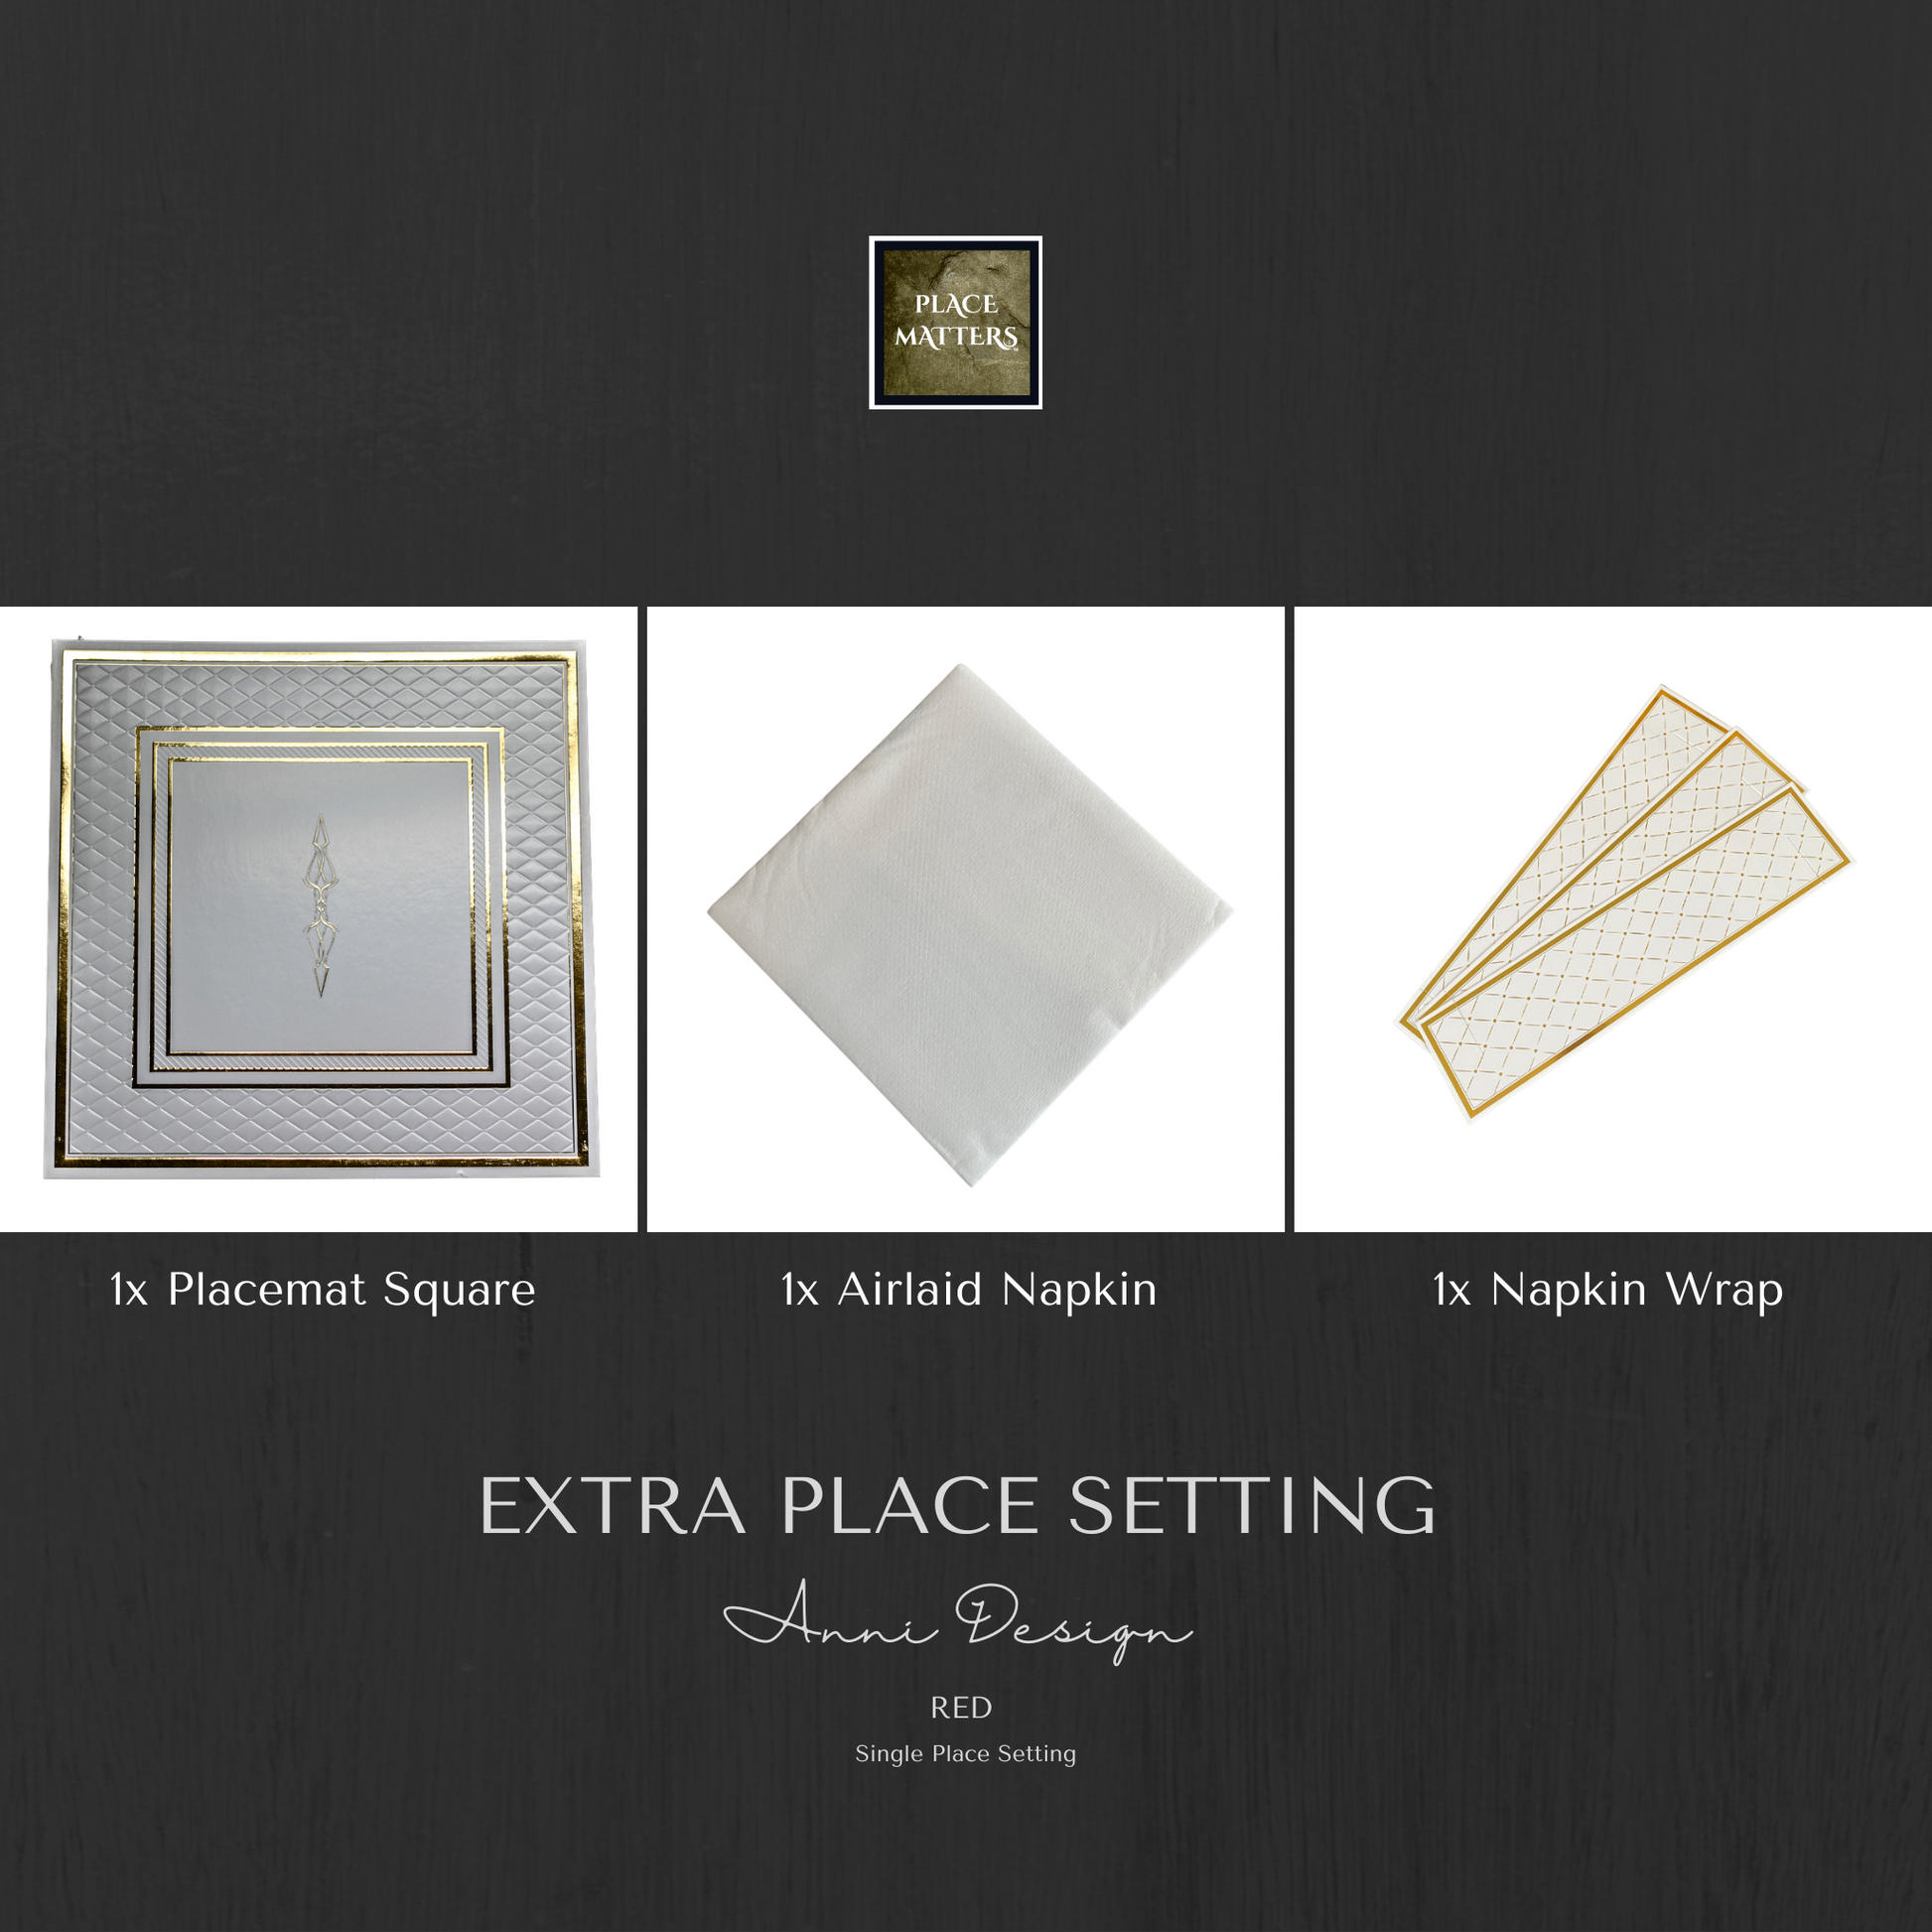 Single Place Setting (Anni Design) Gold - Place Matters